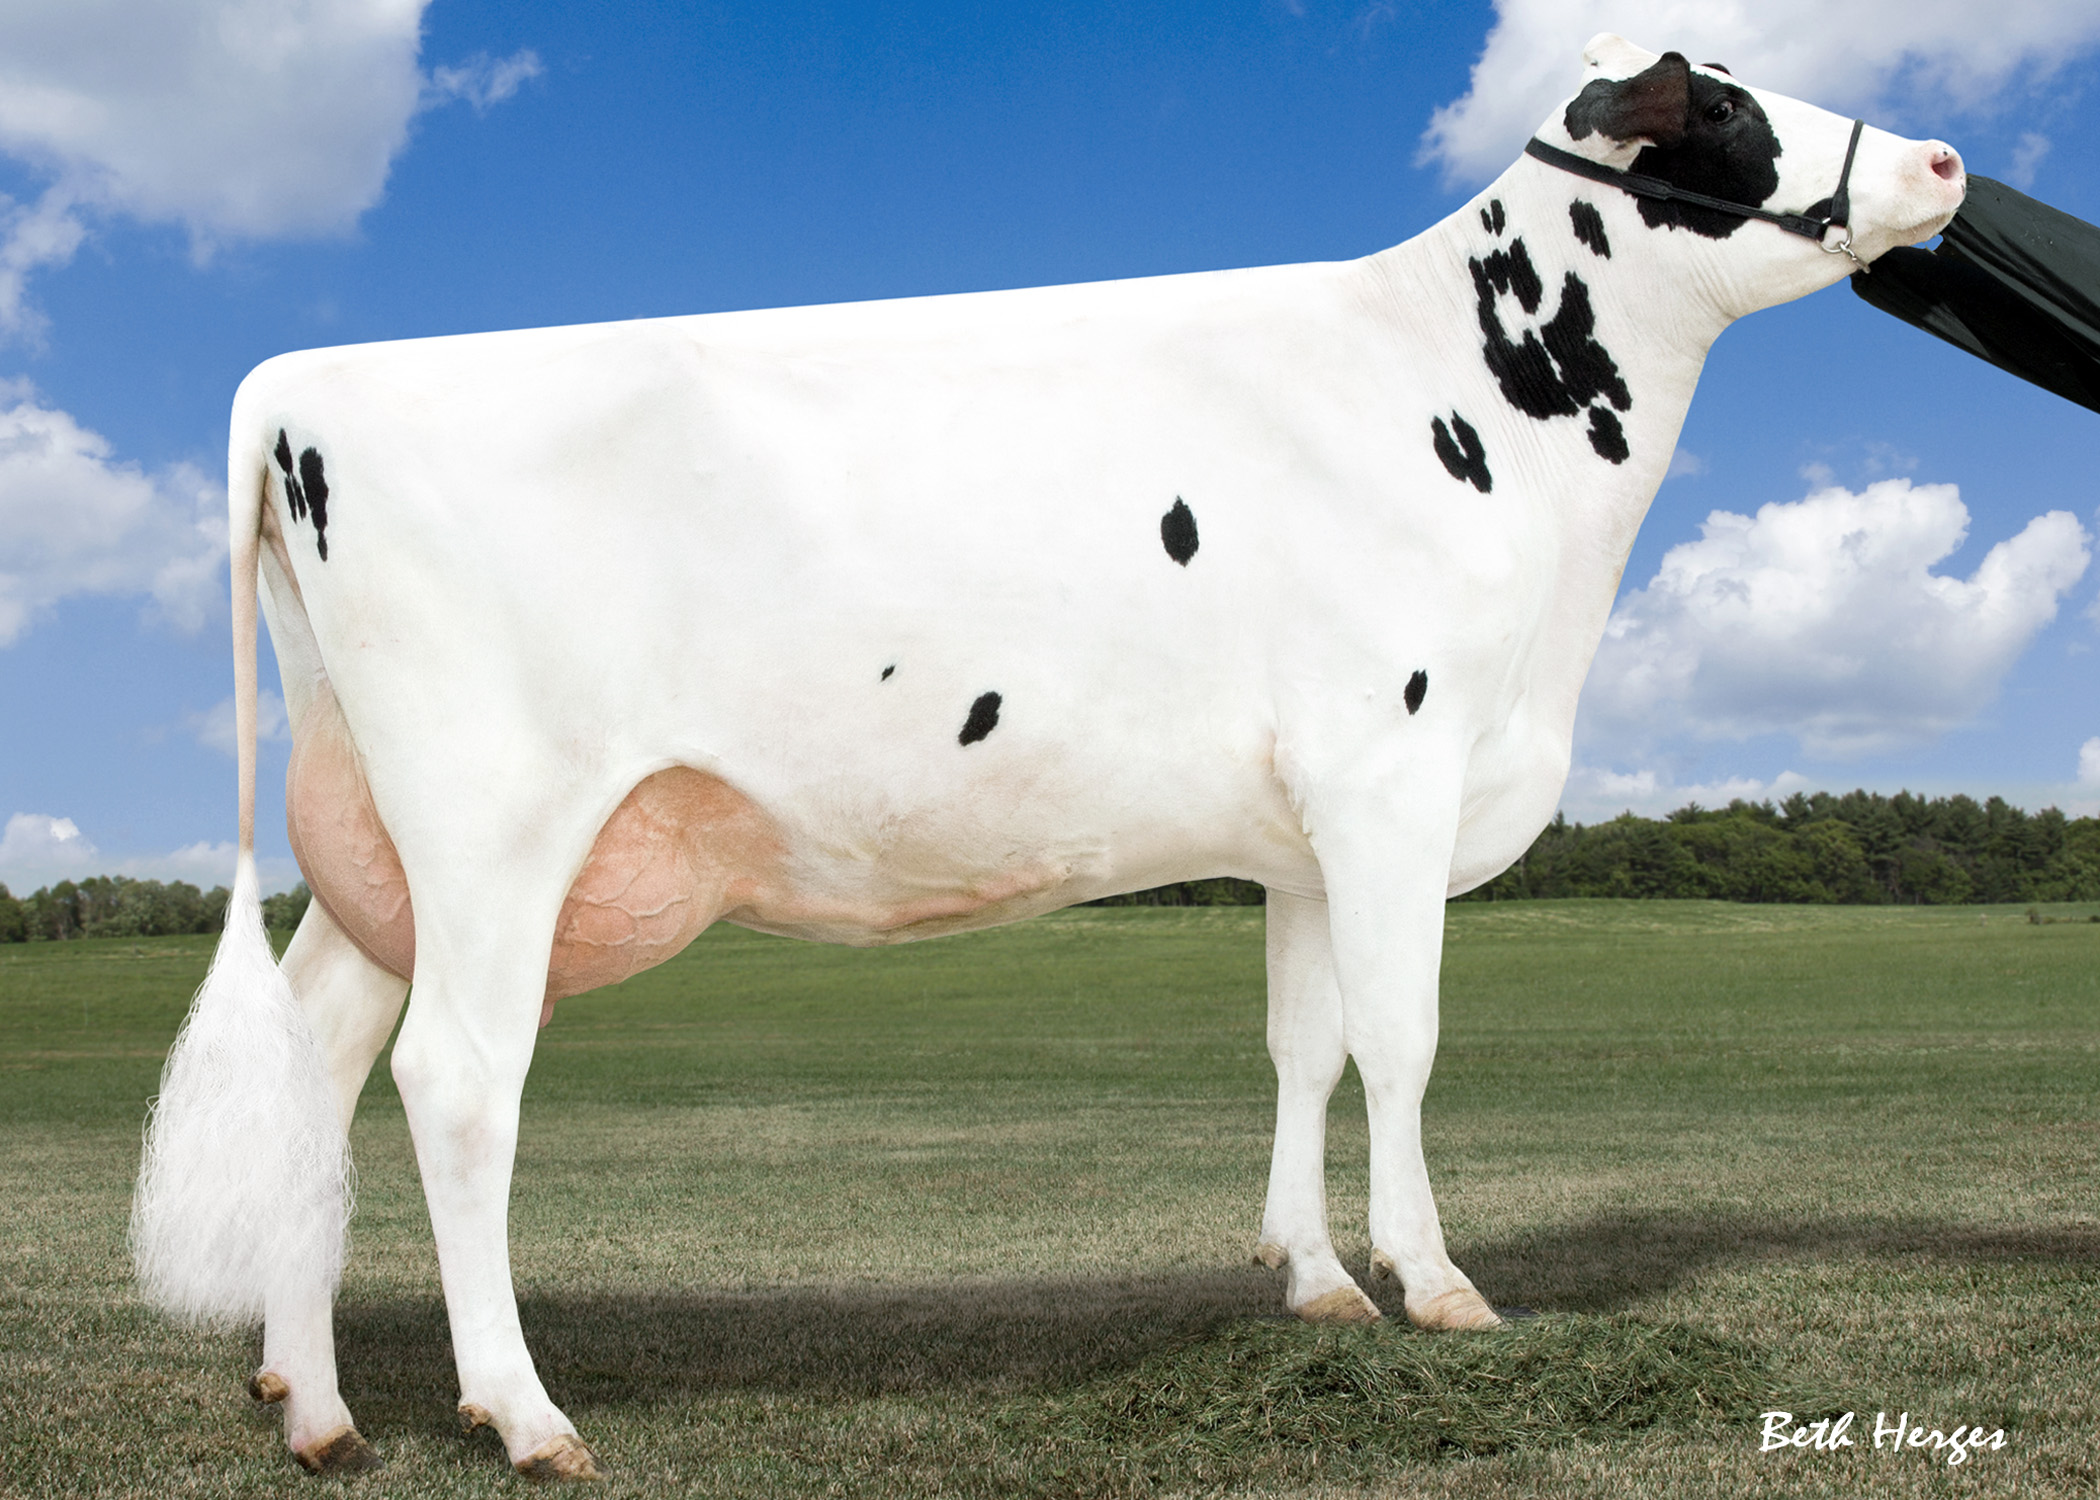  Larcrest Case-ETS VG-86-2YR VG-MS  Her Massey daughter with a gTPI of +2505 sold to Alta Genetics for $185,000